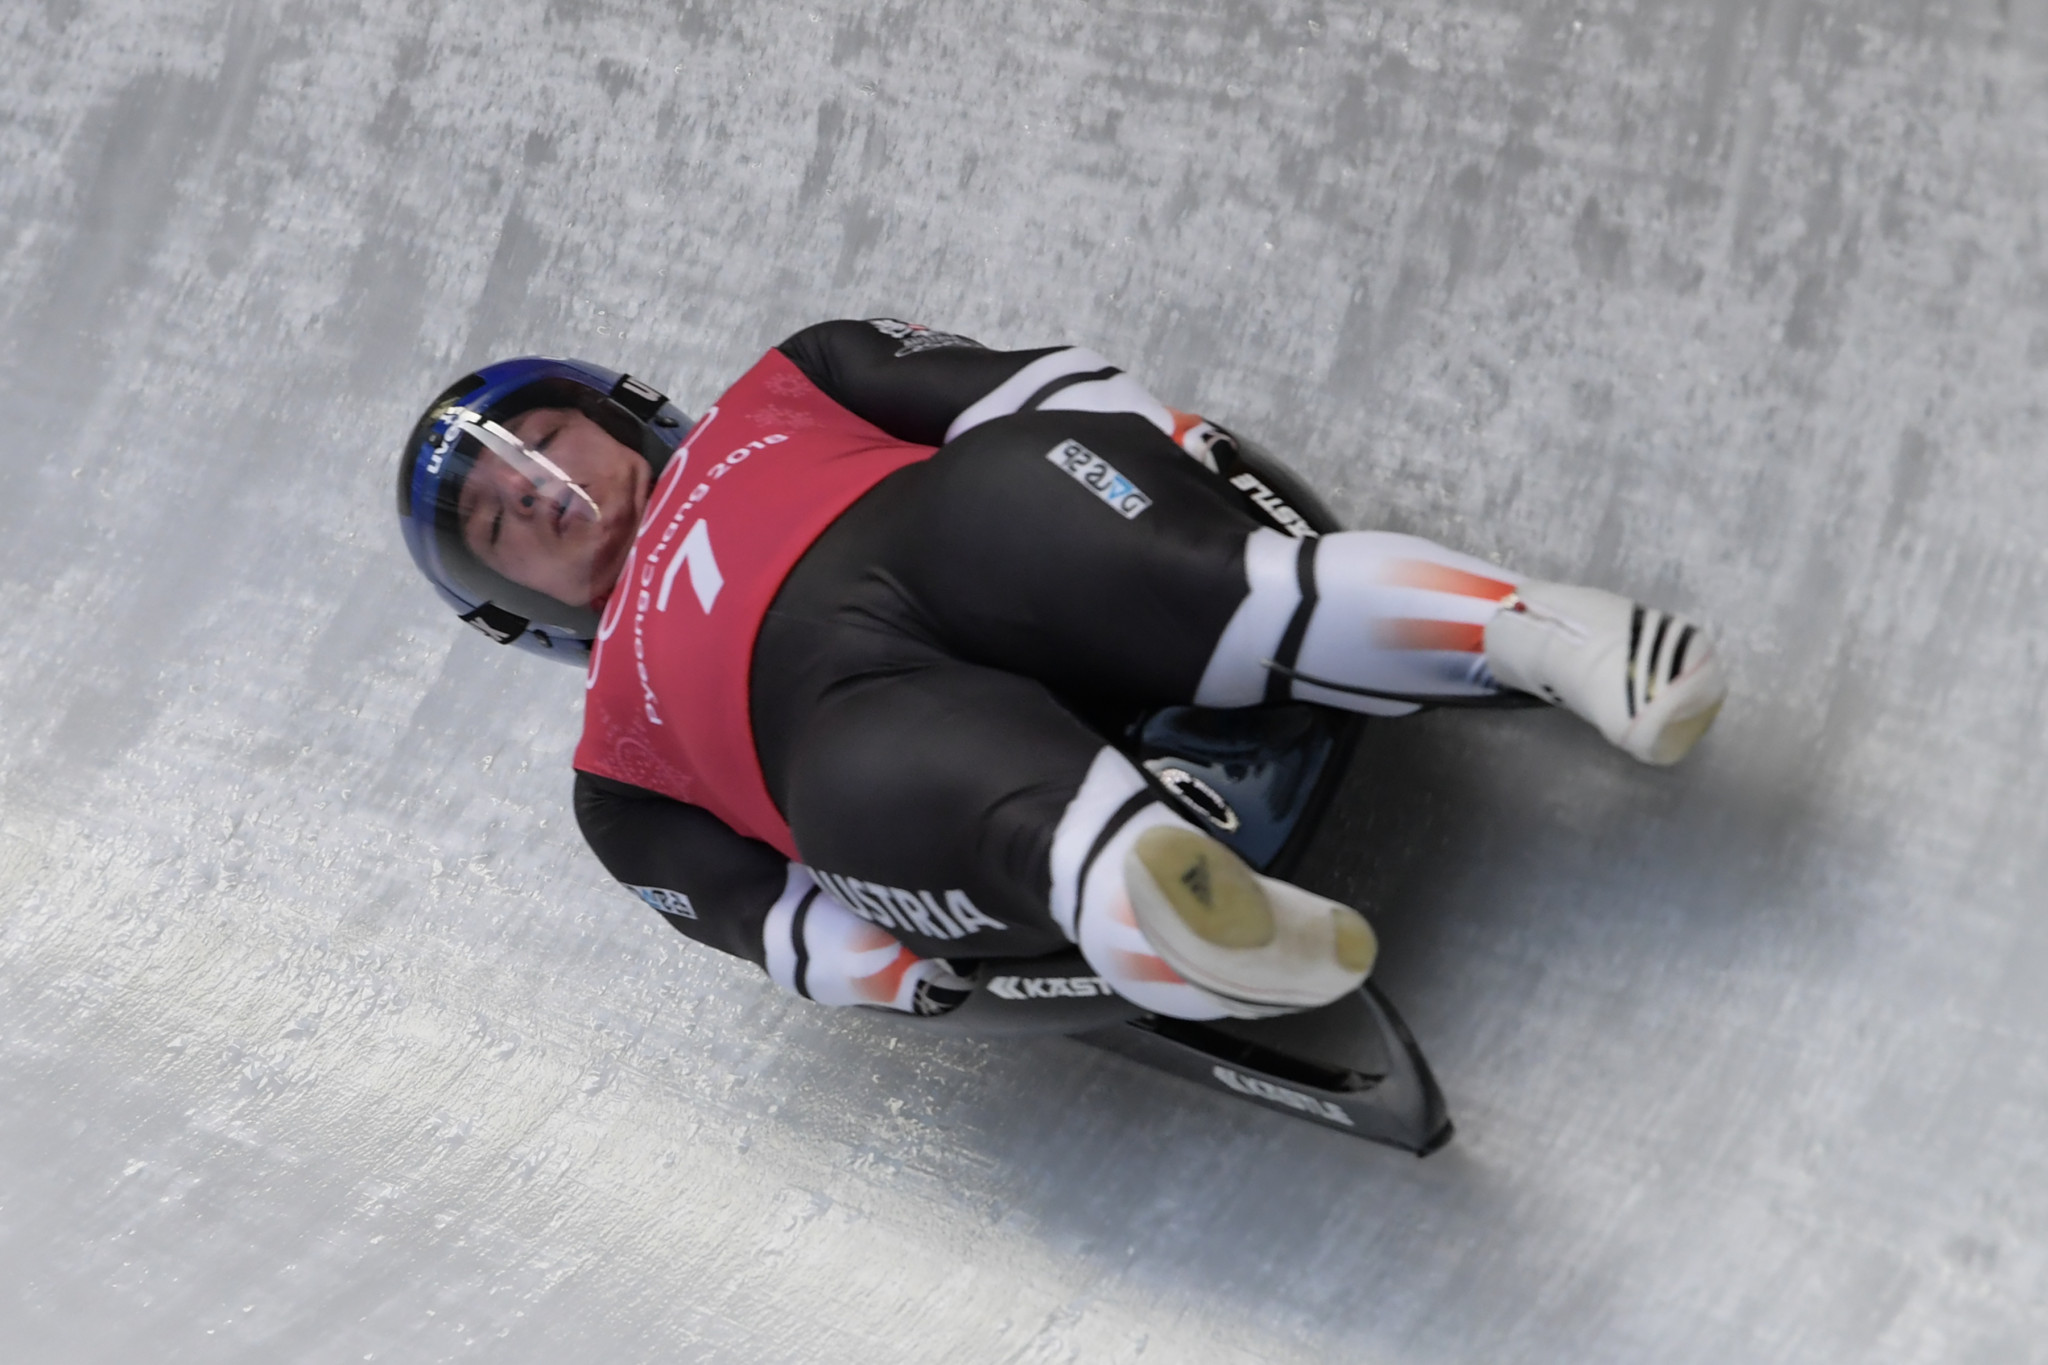 Austria's Wolfgang Kindl will look to regain his lead in the overall rankings after being disqualified at the last FIL Luge World Cup event in Lake Placid ©Getty Images 